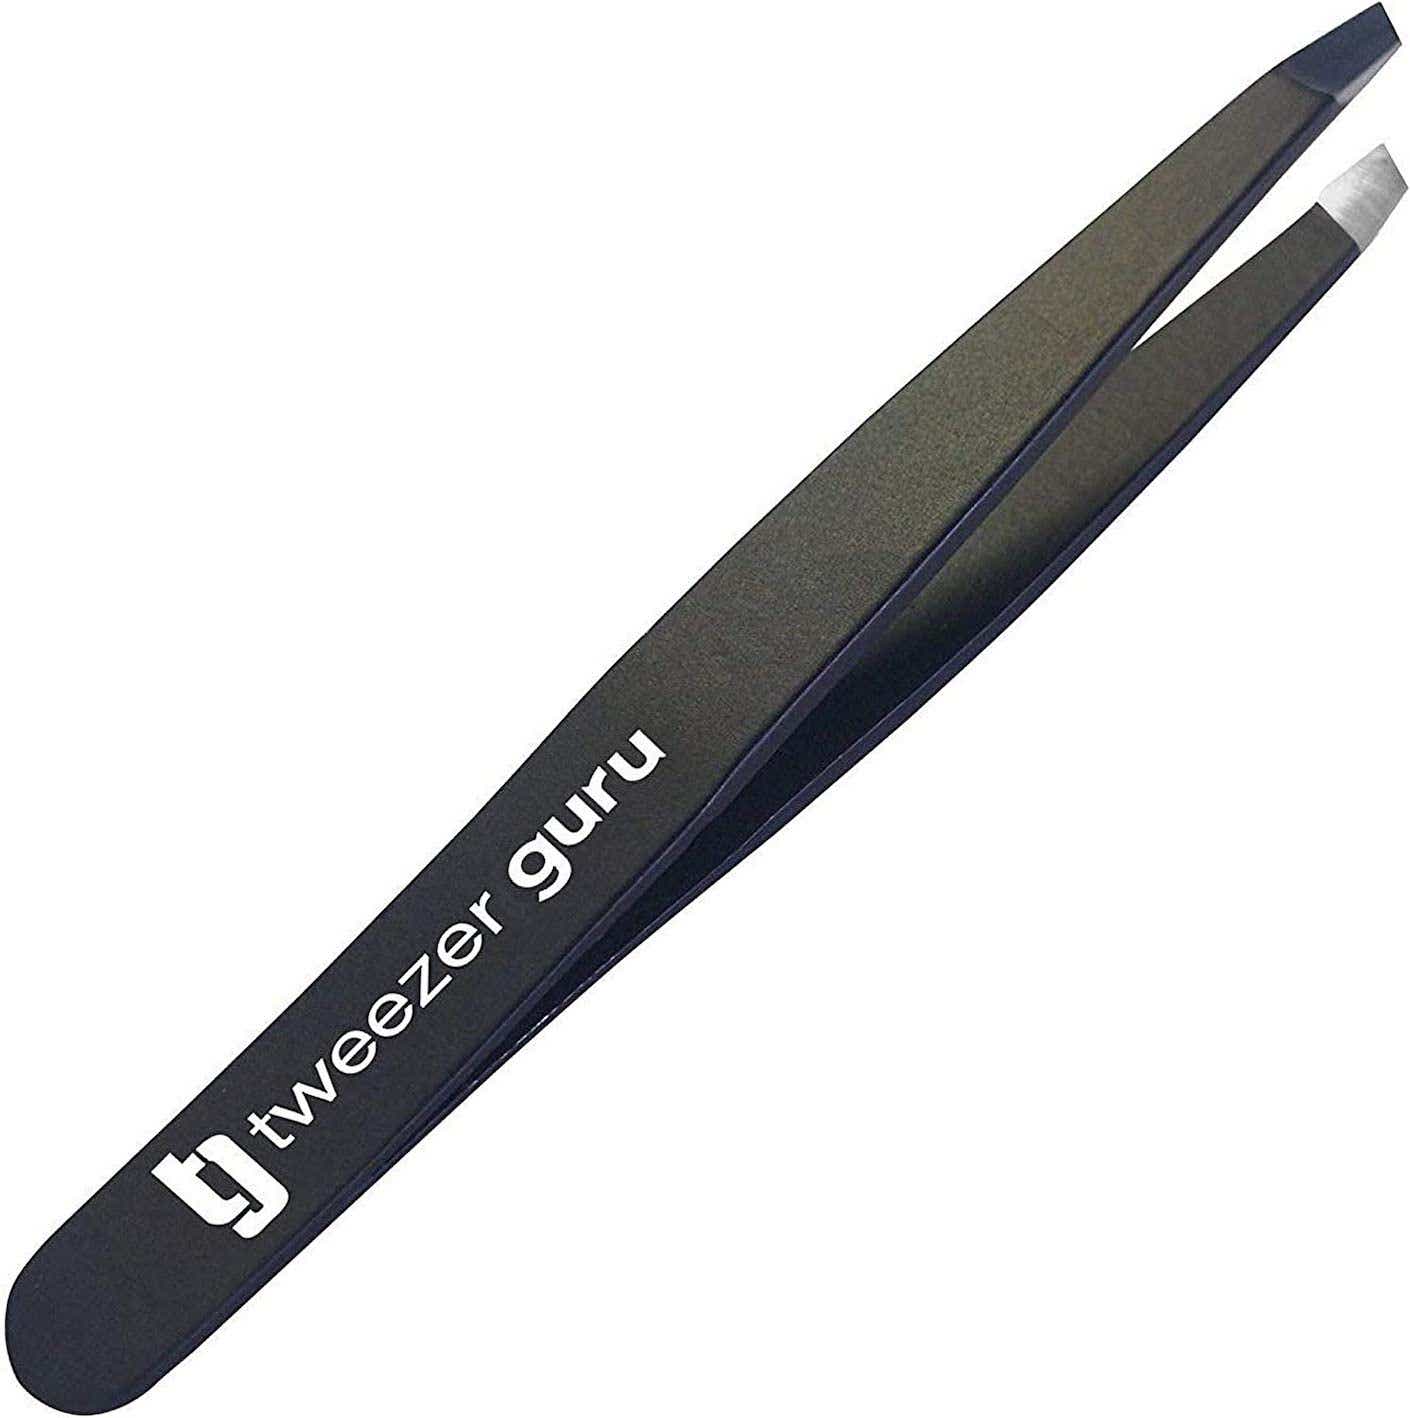 A pair of black, silver tipped tweezers is pictured.